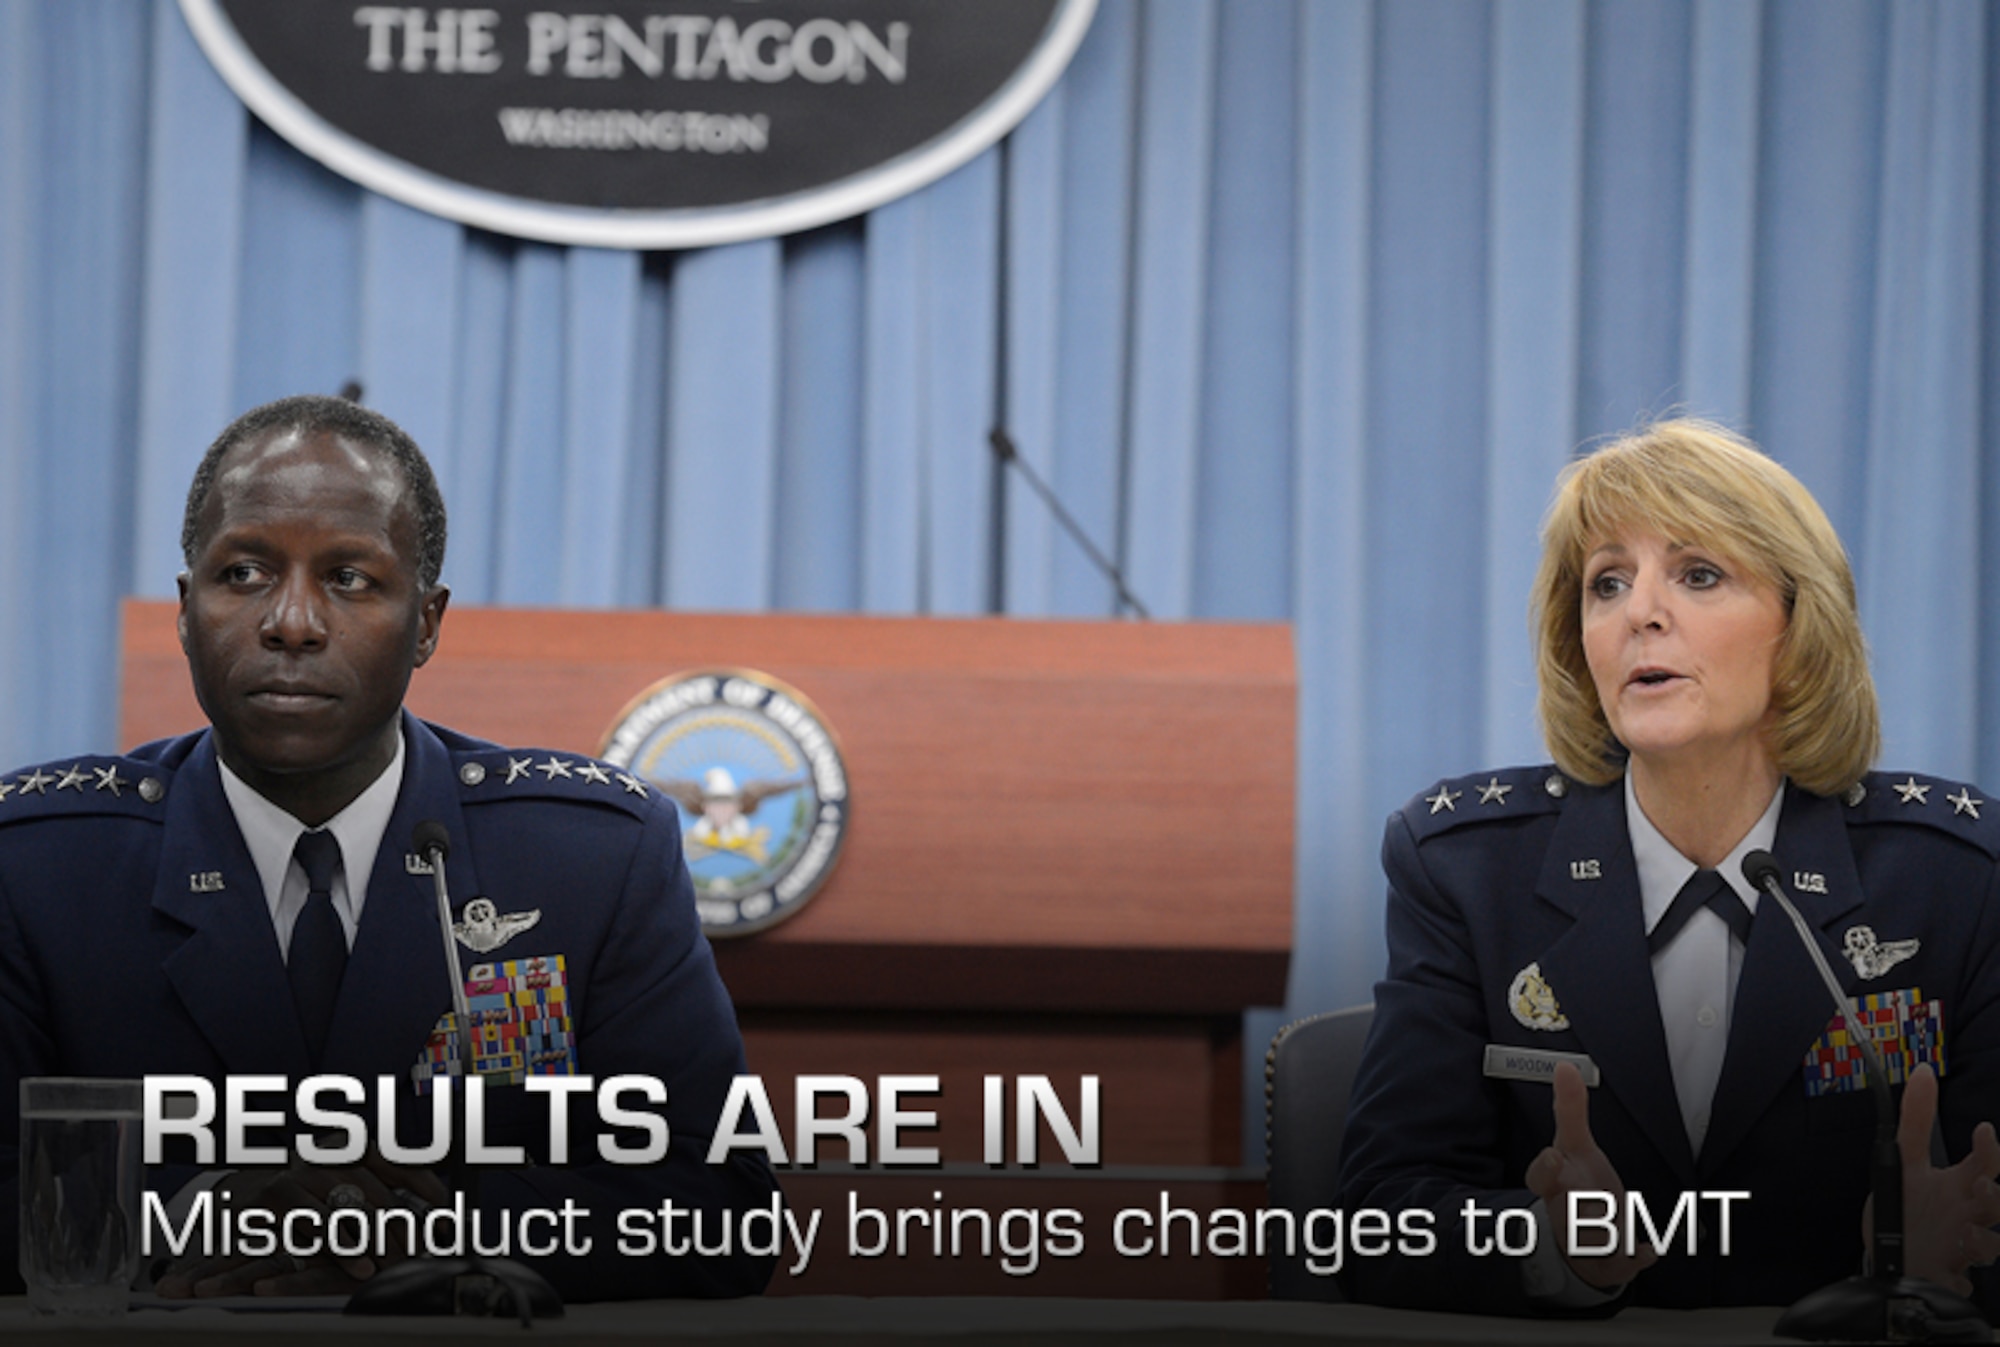 Gen. Edward Rice Jr., commander of Air Education and Training Command, answers questions with Maj. Gen. Margaret Woodward, Air Force Chief of Safety and commander of Air Force Safety Center at Kirtland Air Force Base, N.M., during a Pentagon press briefing on Nov. 14, 2012. Rice presented the findings relating to Woodward's investigation into allegations of sexual misconduct at Basic Military Training. (U.S. Air Force photo/Scott M. Ash)